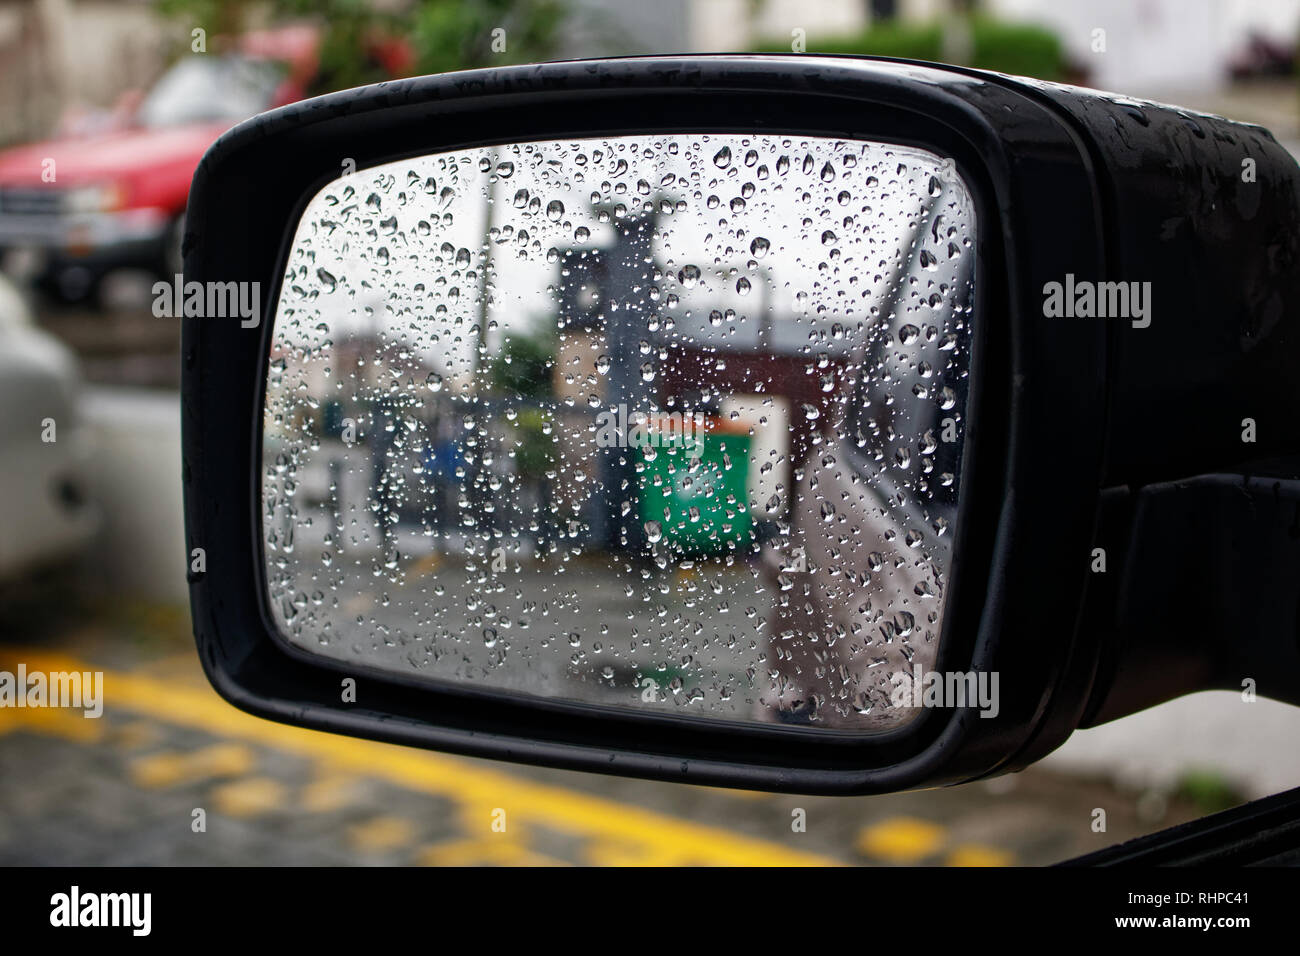 Water droplets on a car mirror, reflection on glass with raindrops Stock Photo